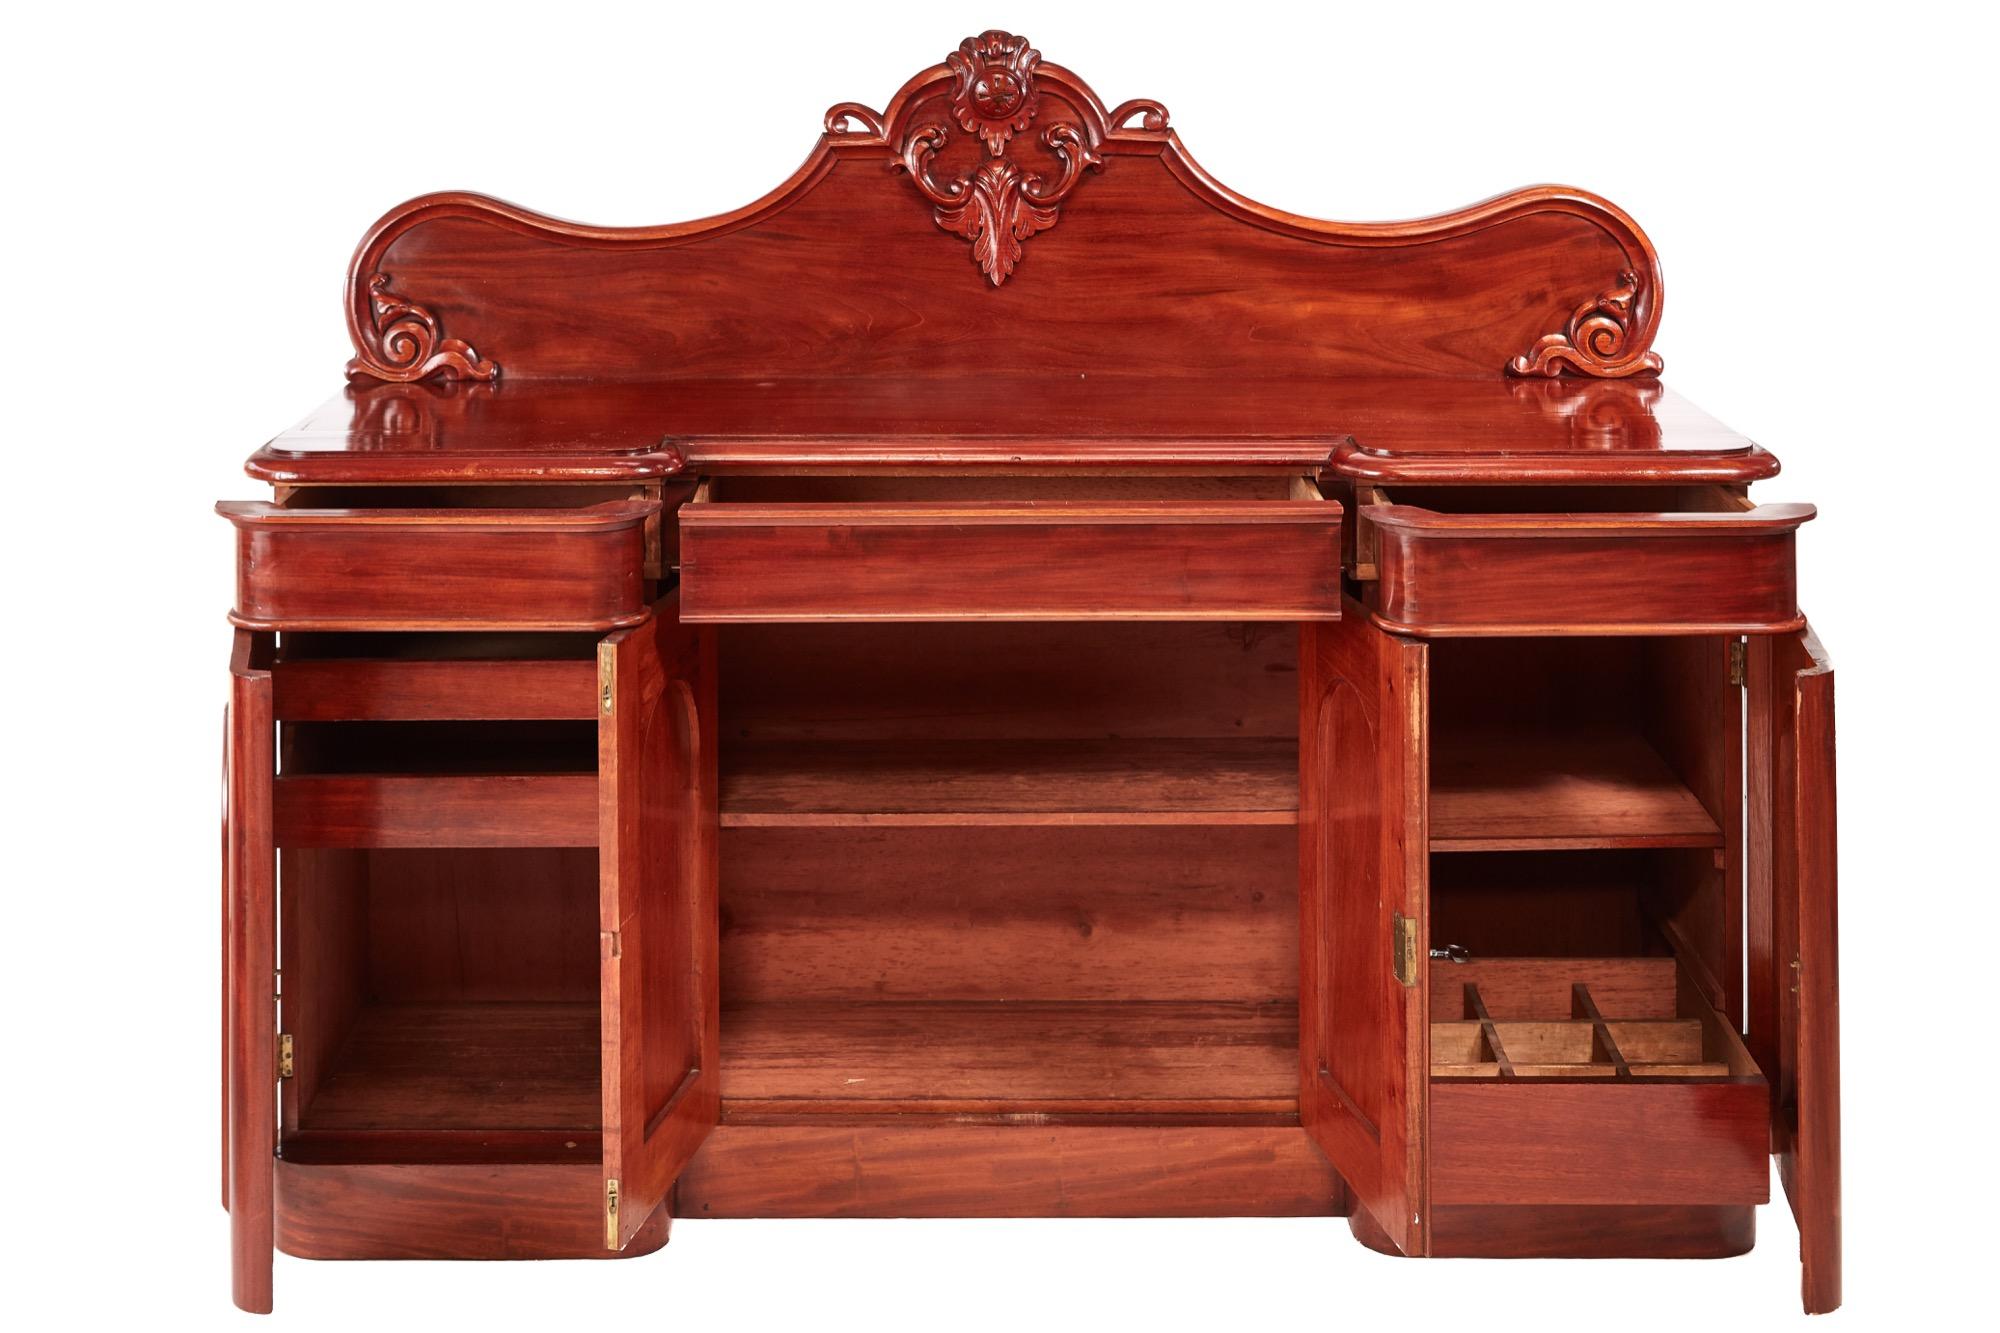 Quality 19th century Victorian antique carved mahogany sideboard with a lovely shaped carved back, lovely quality mahogany top, three frieze drawers, four quality figured mahogany panelled doors, lovely fitted interior with drawers and sliding